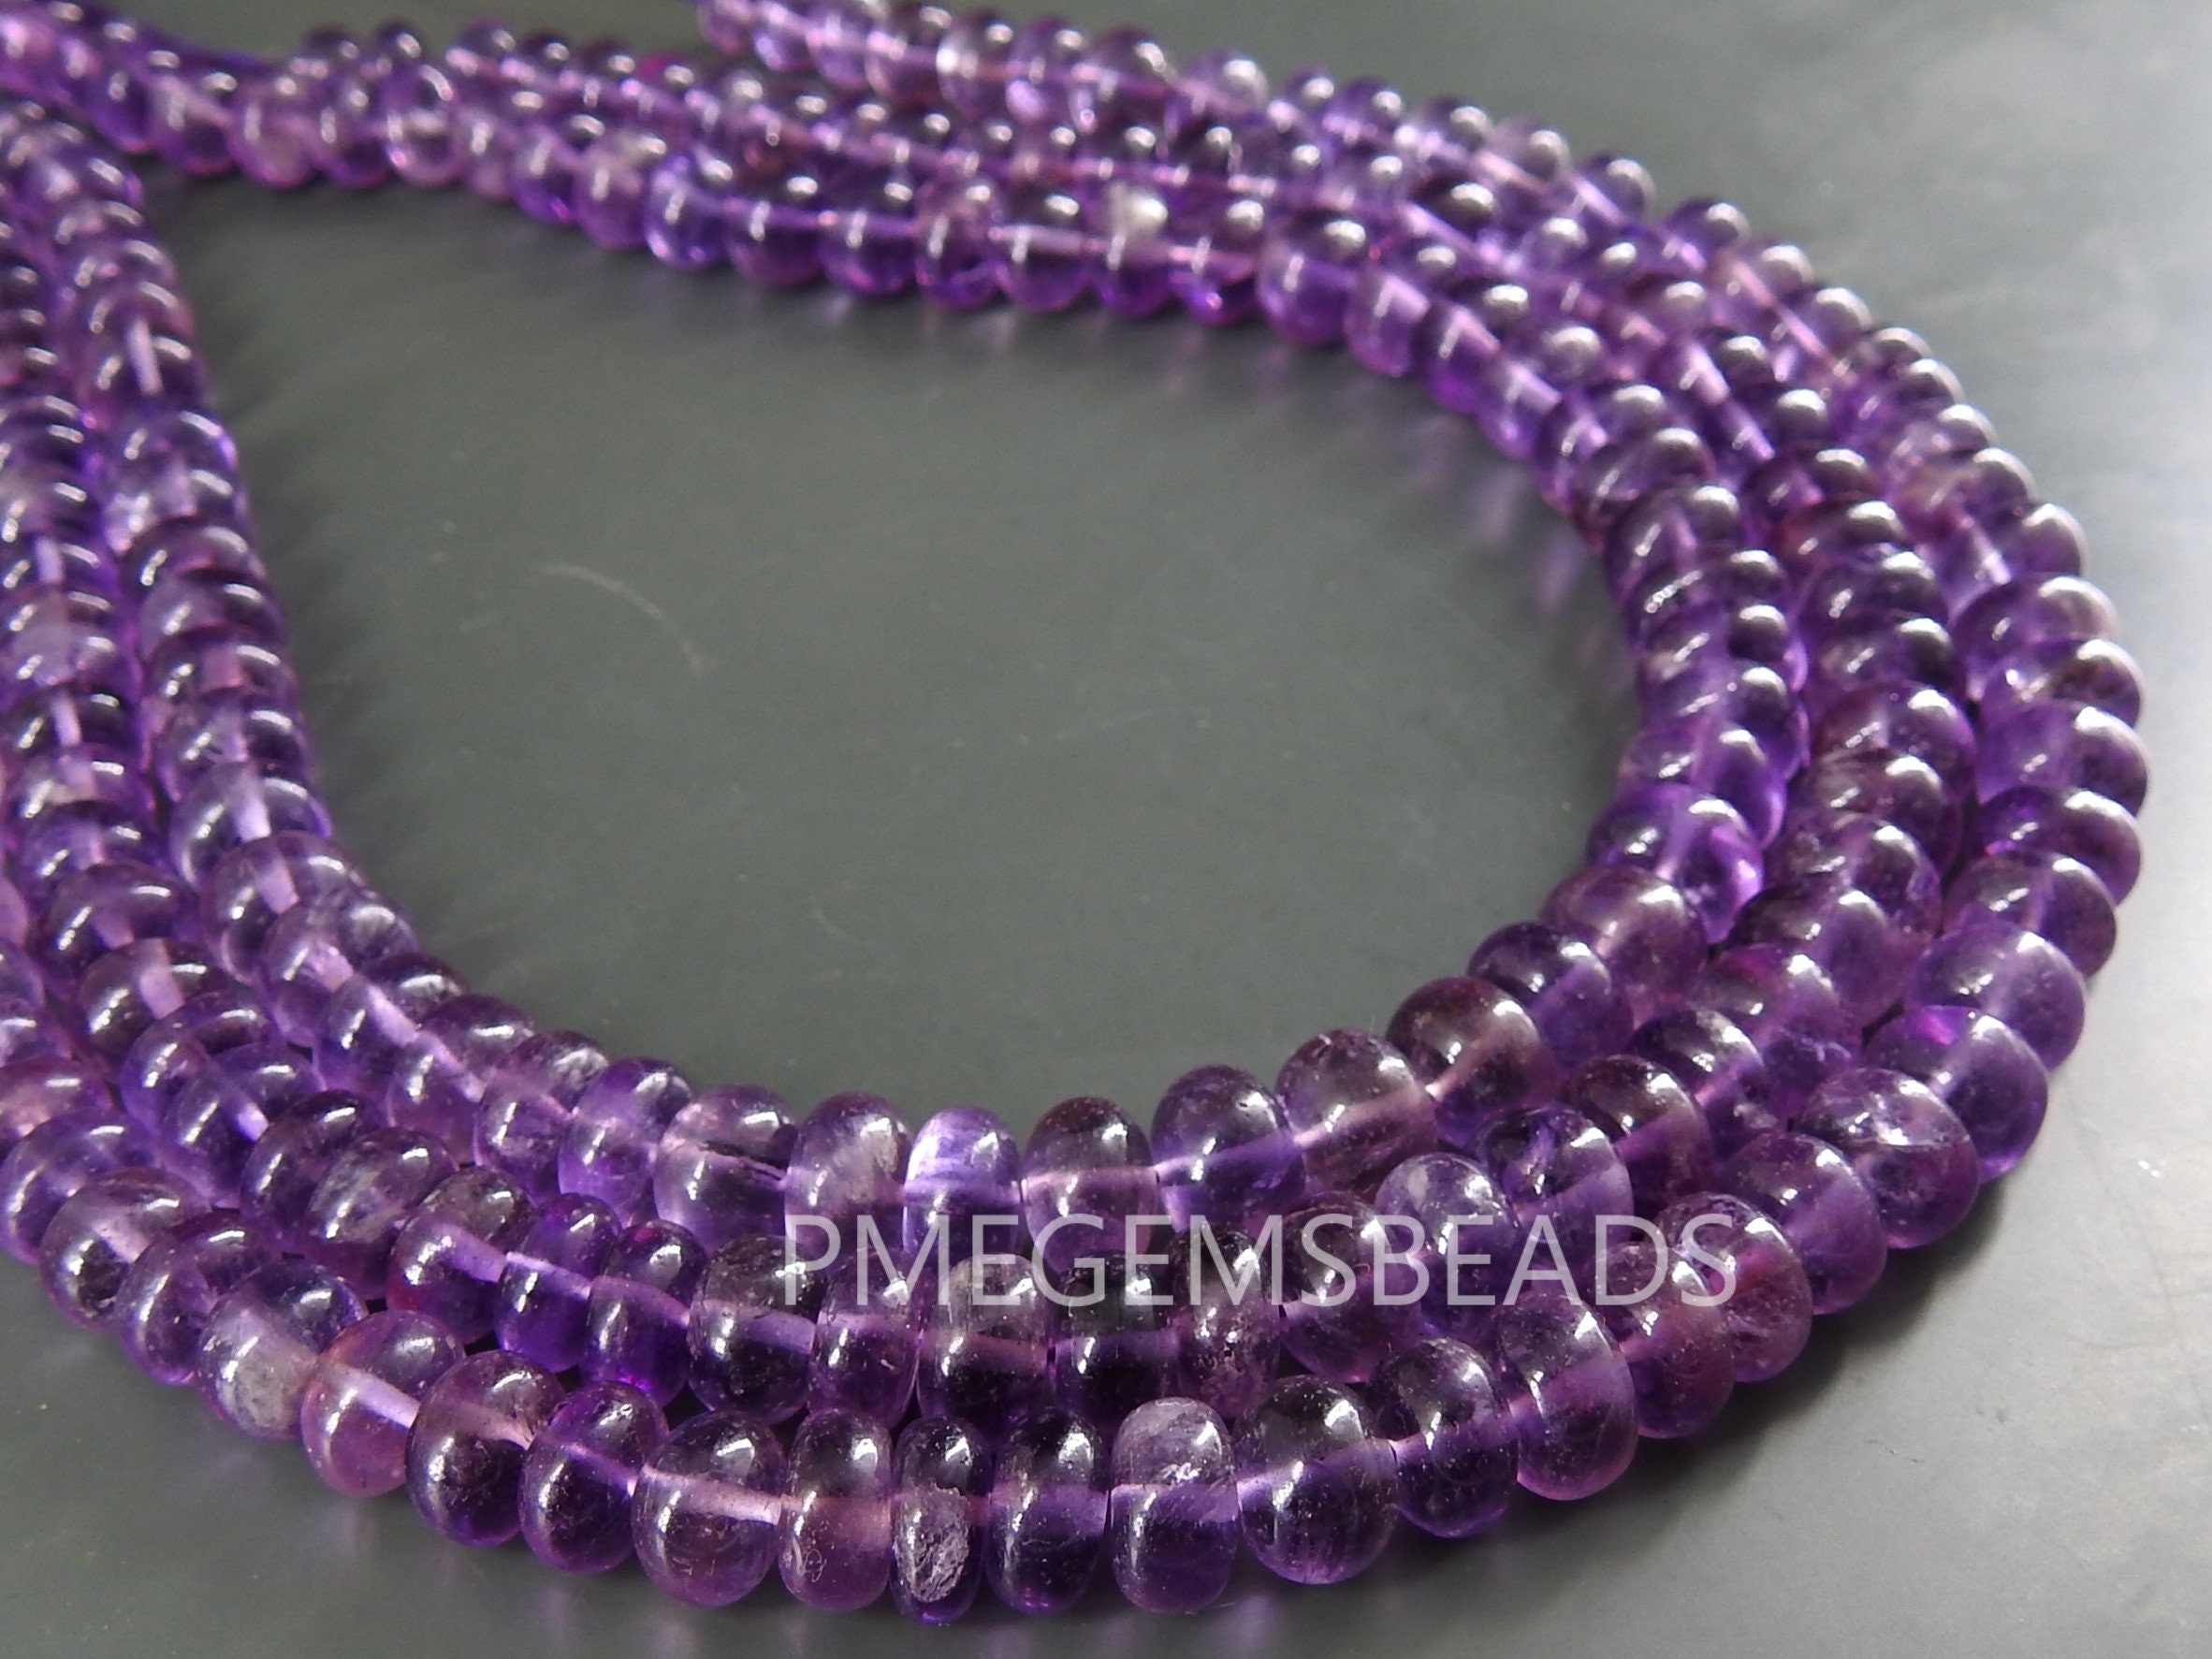 Amethyst Smooth Roundel Beads,Handmade,Loose Stone,For Making Jewelry,Necklace,12Inch Strand,Wholesaler,Supplies,100%Natural PME-B9 | Save 33% - Rajasthan Living 15